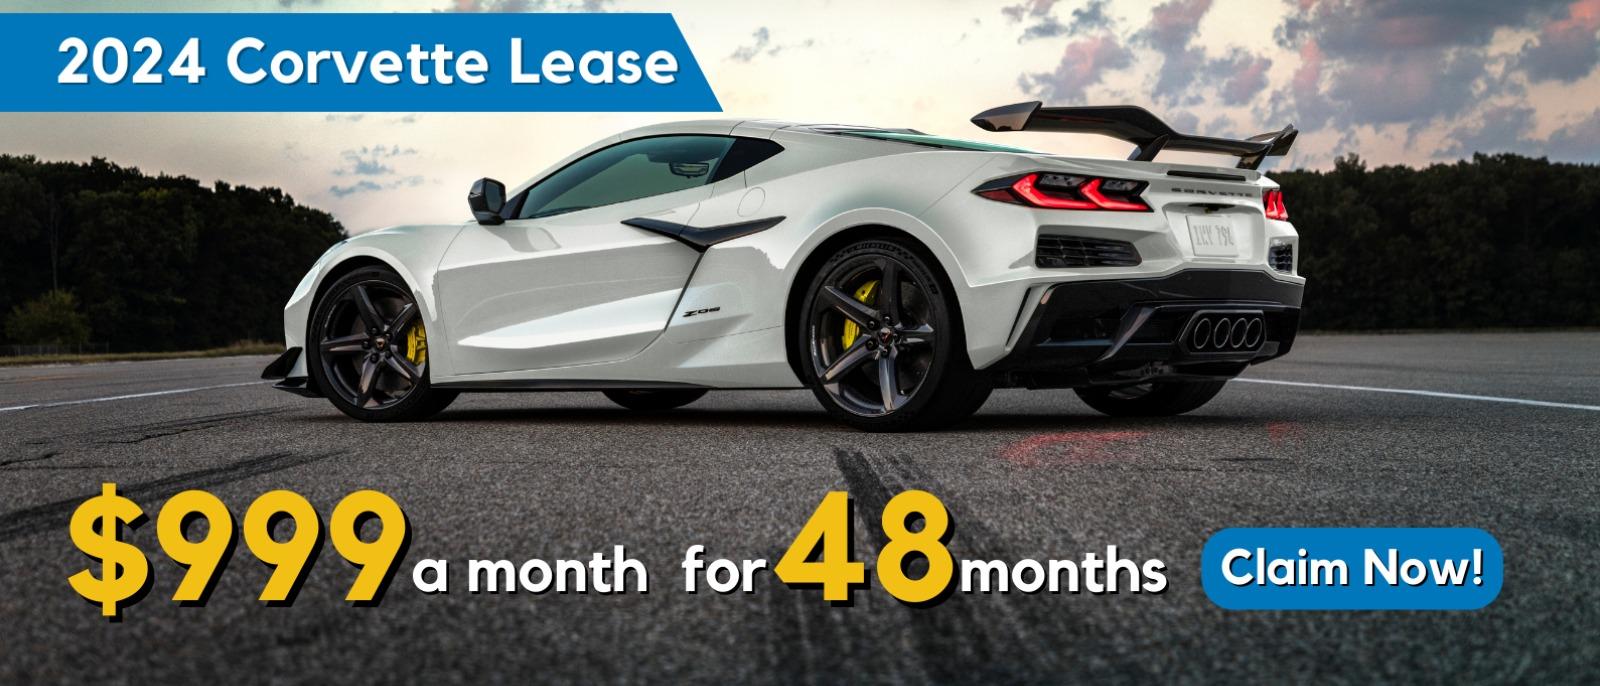 2024 Corvette Lease 
$999 a month for 48 months